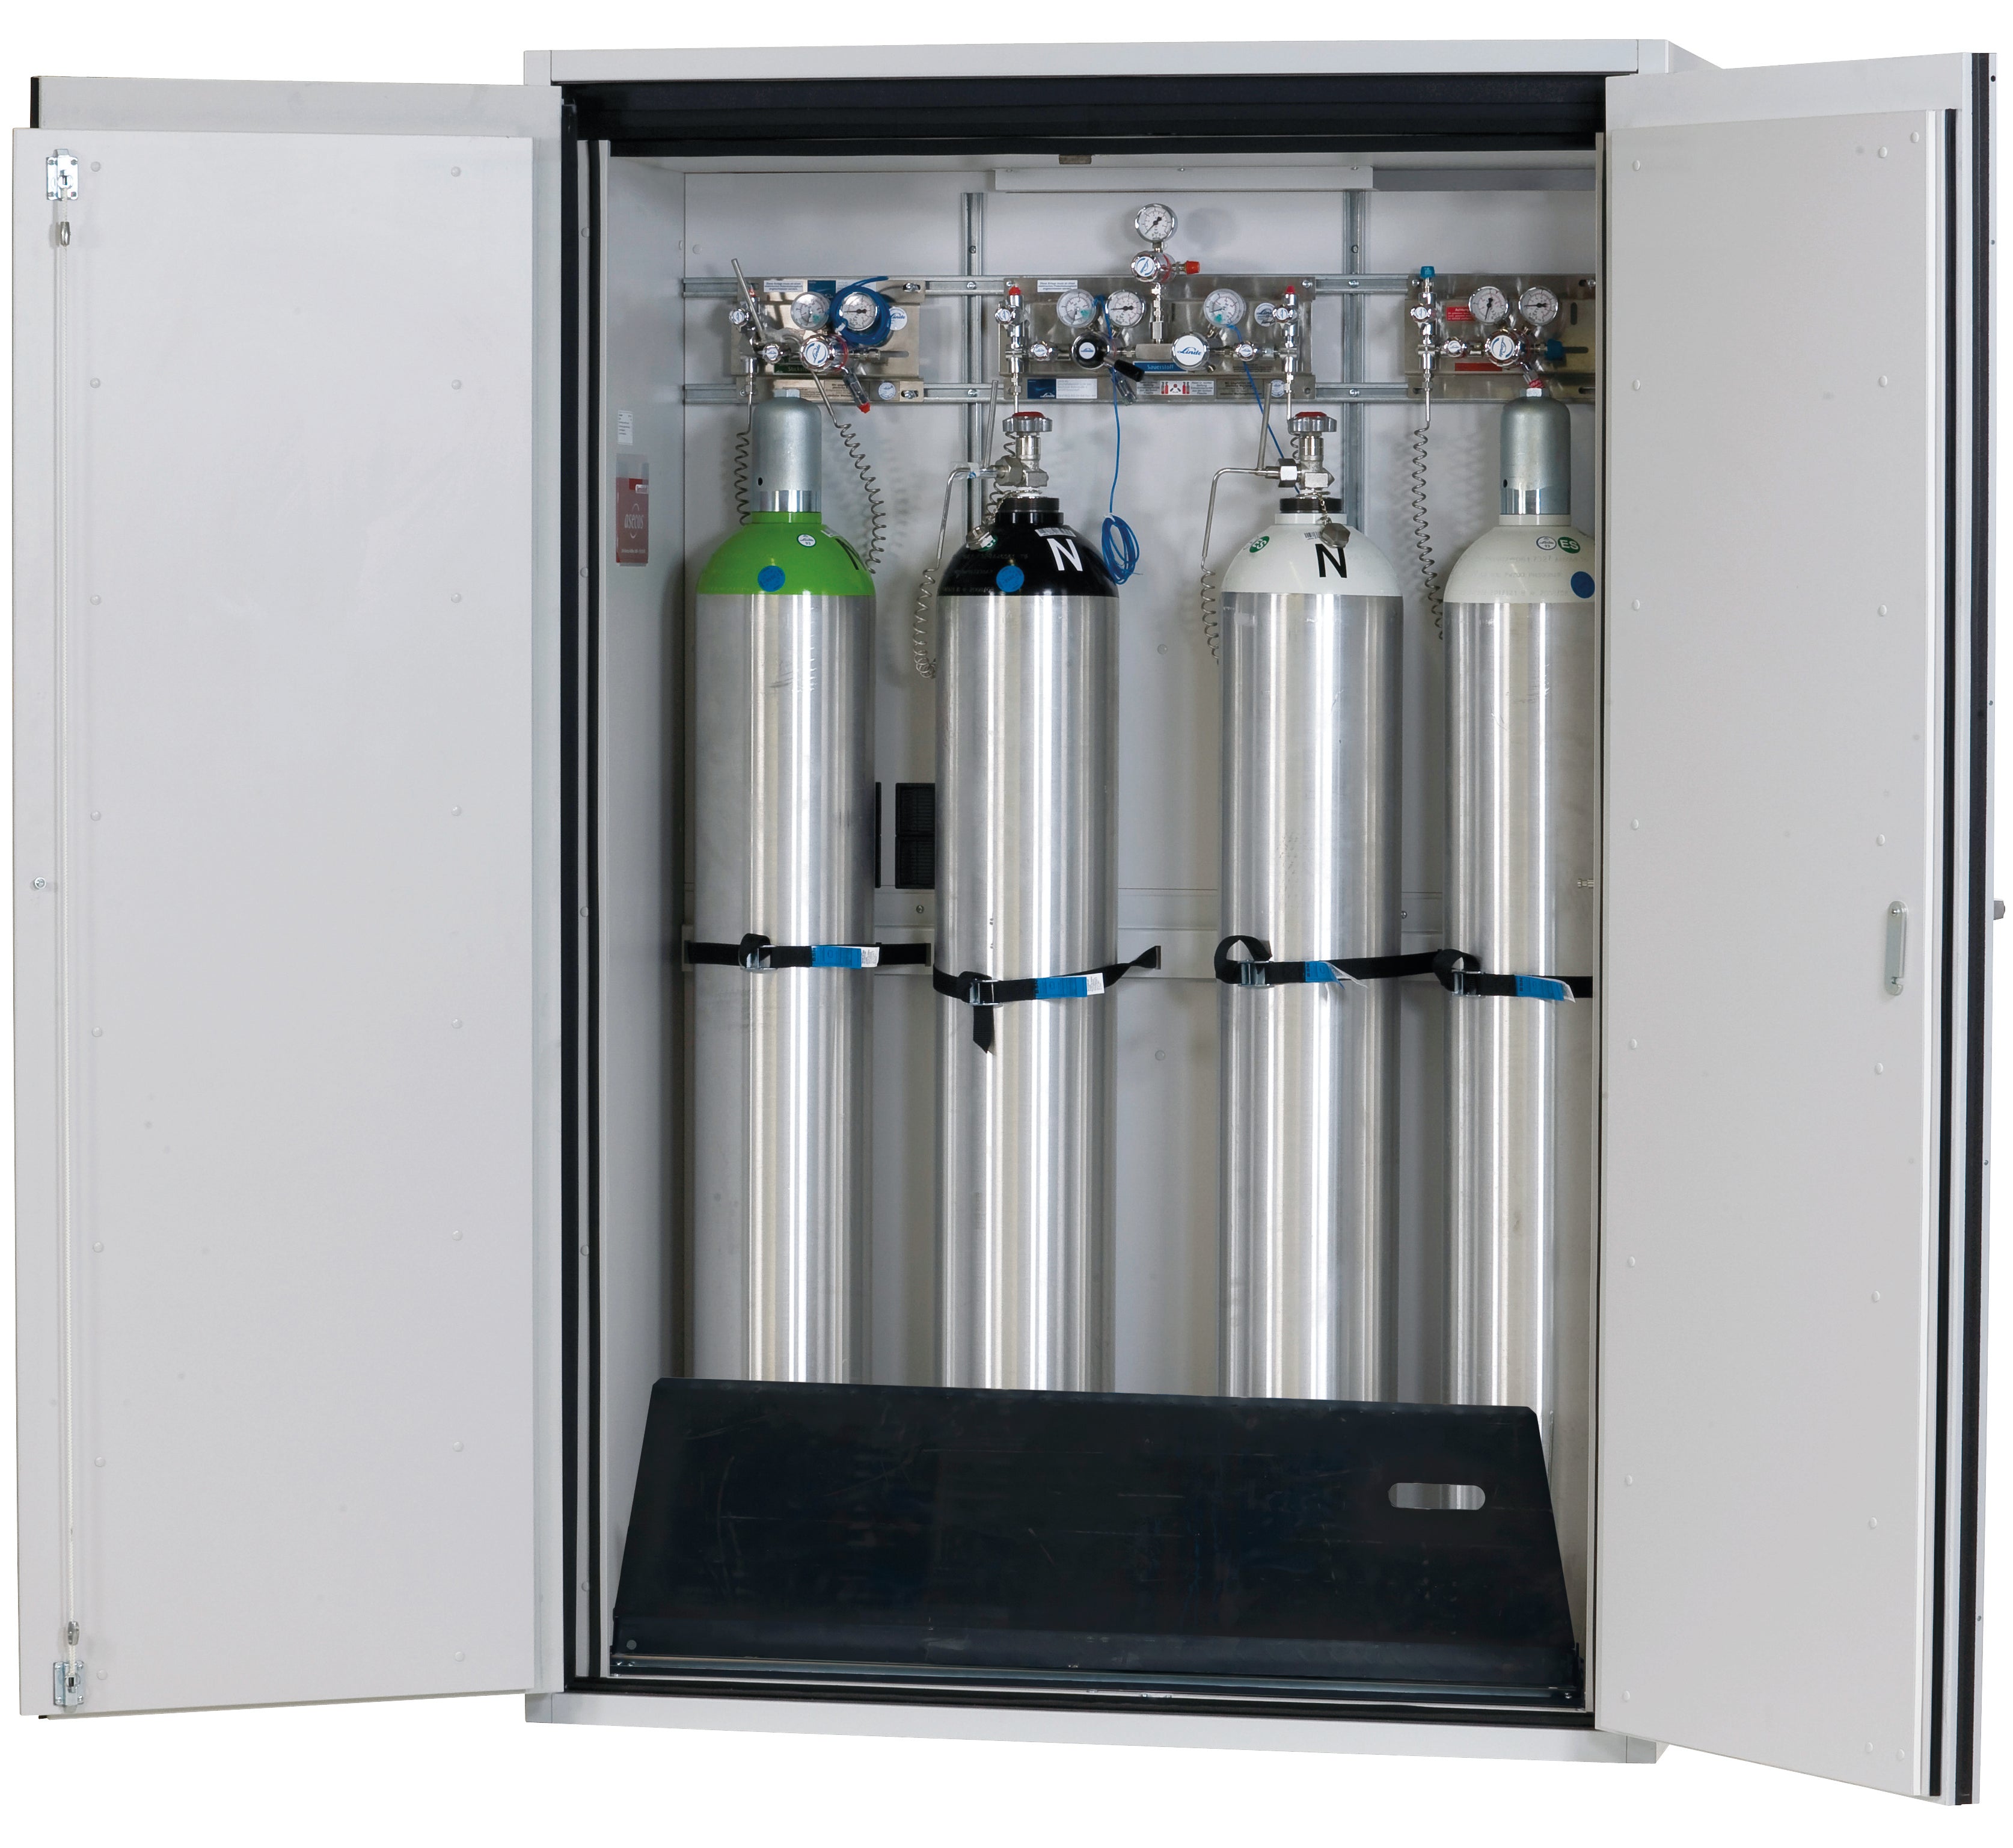 Type 90 compressed gas bottle cabinet G-ULTIMATE-90 model G90.205.140 in light gray RAL 7035 with standard interior fittings for 4x compressed gas bottles of 50 liters each